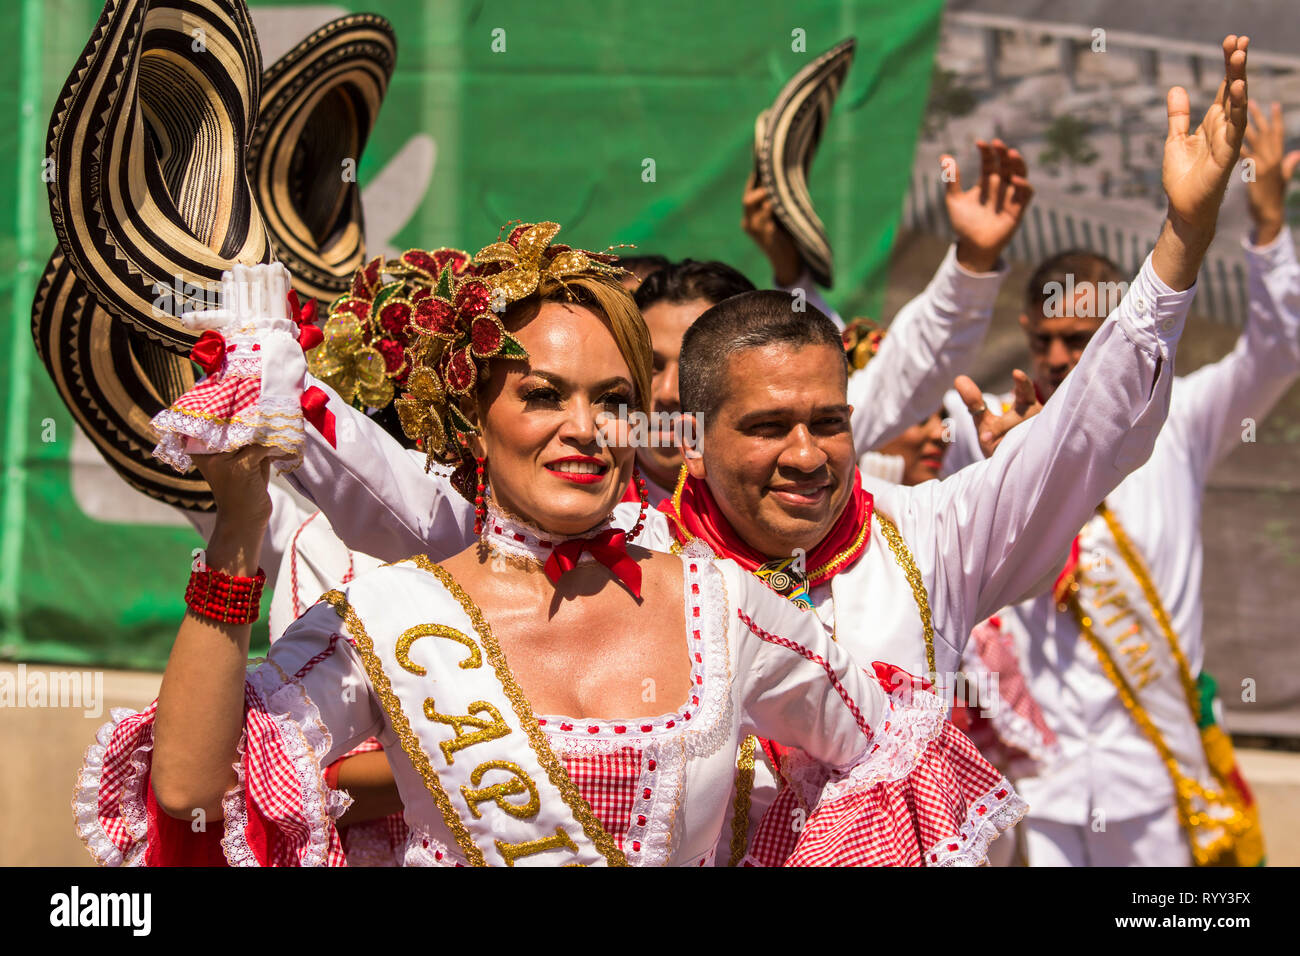 Cumbiamba. The battle of flowers is an event that takes place on Saturday of Carnival. It is a parade of floats, comparsas, cumbiambas, folk groups of Stock Photo